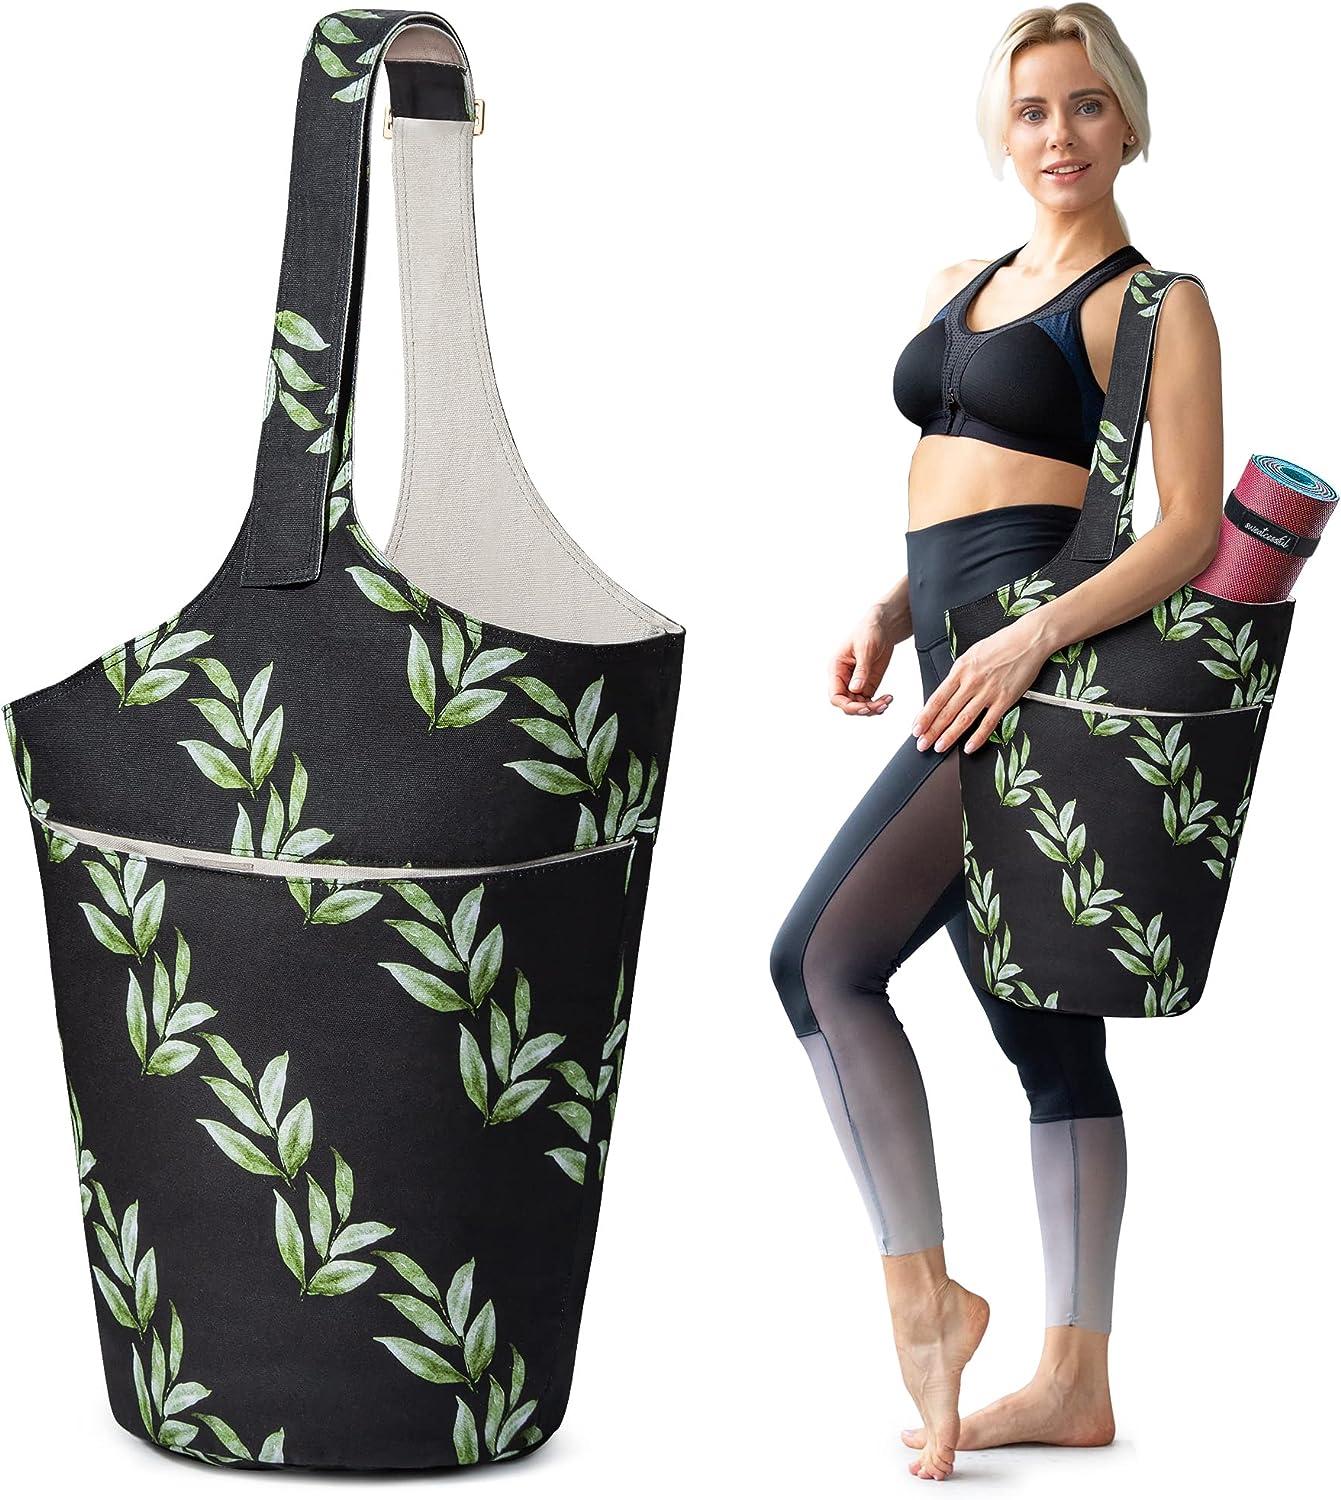 Yoga Mat Bags For Women Yoga Mat Carrier Tote, Holds More Yoga Accessories